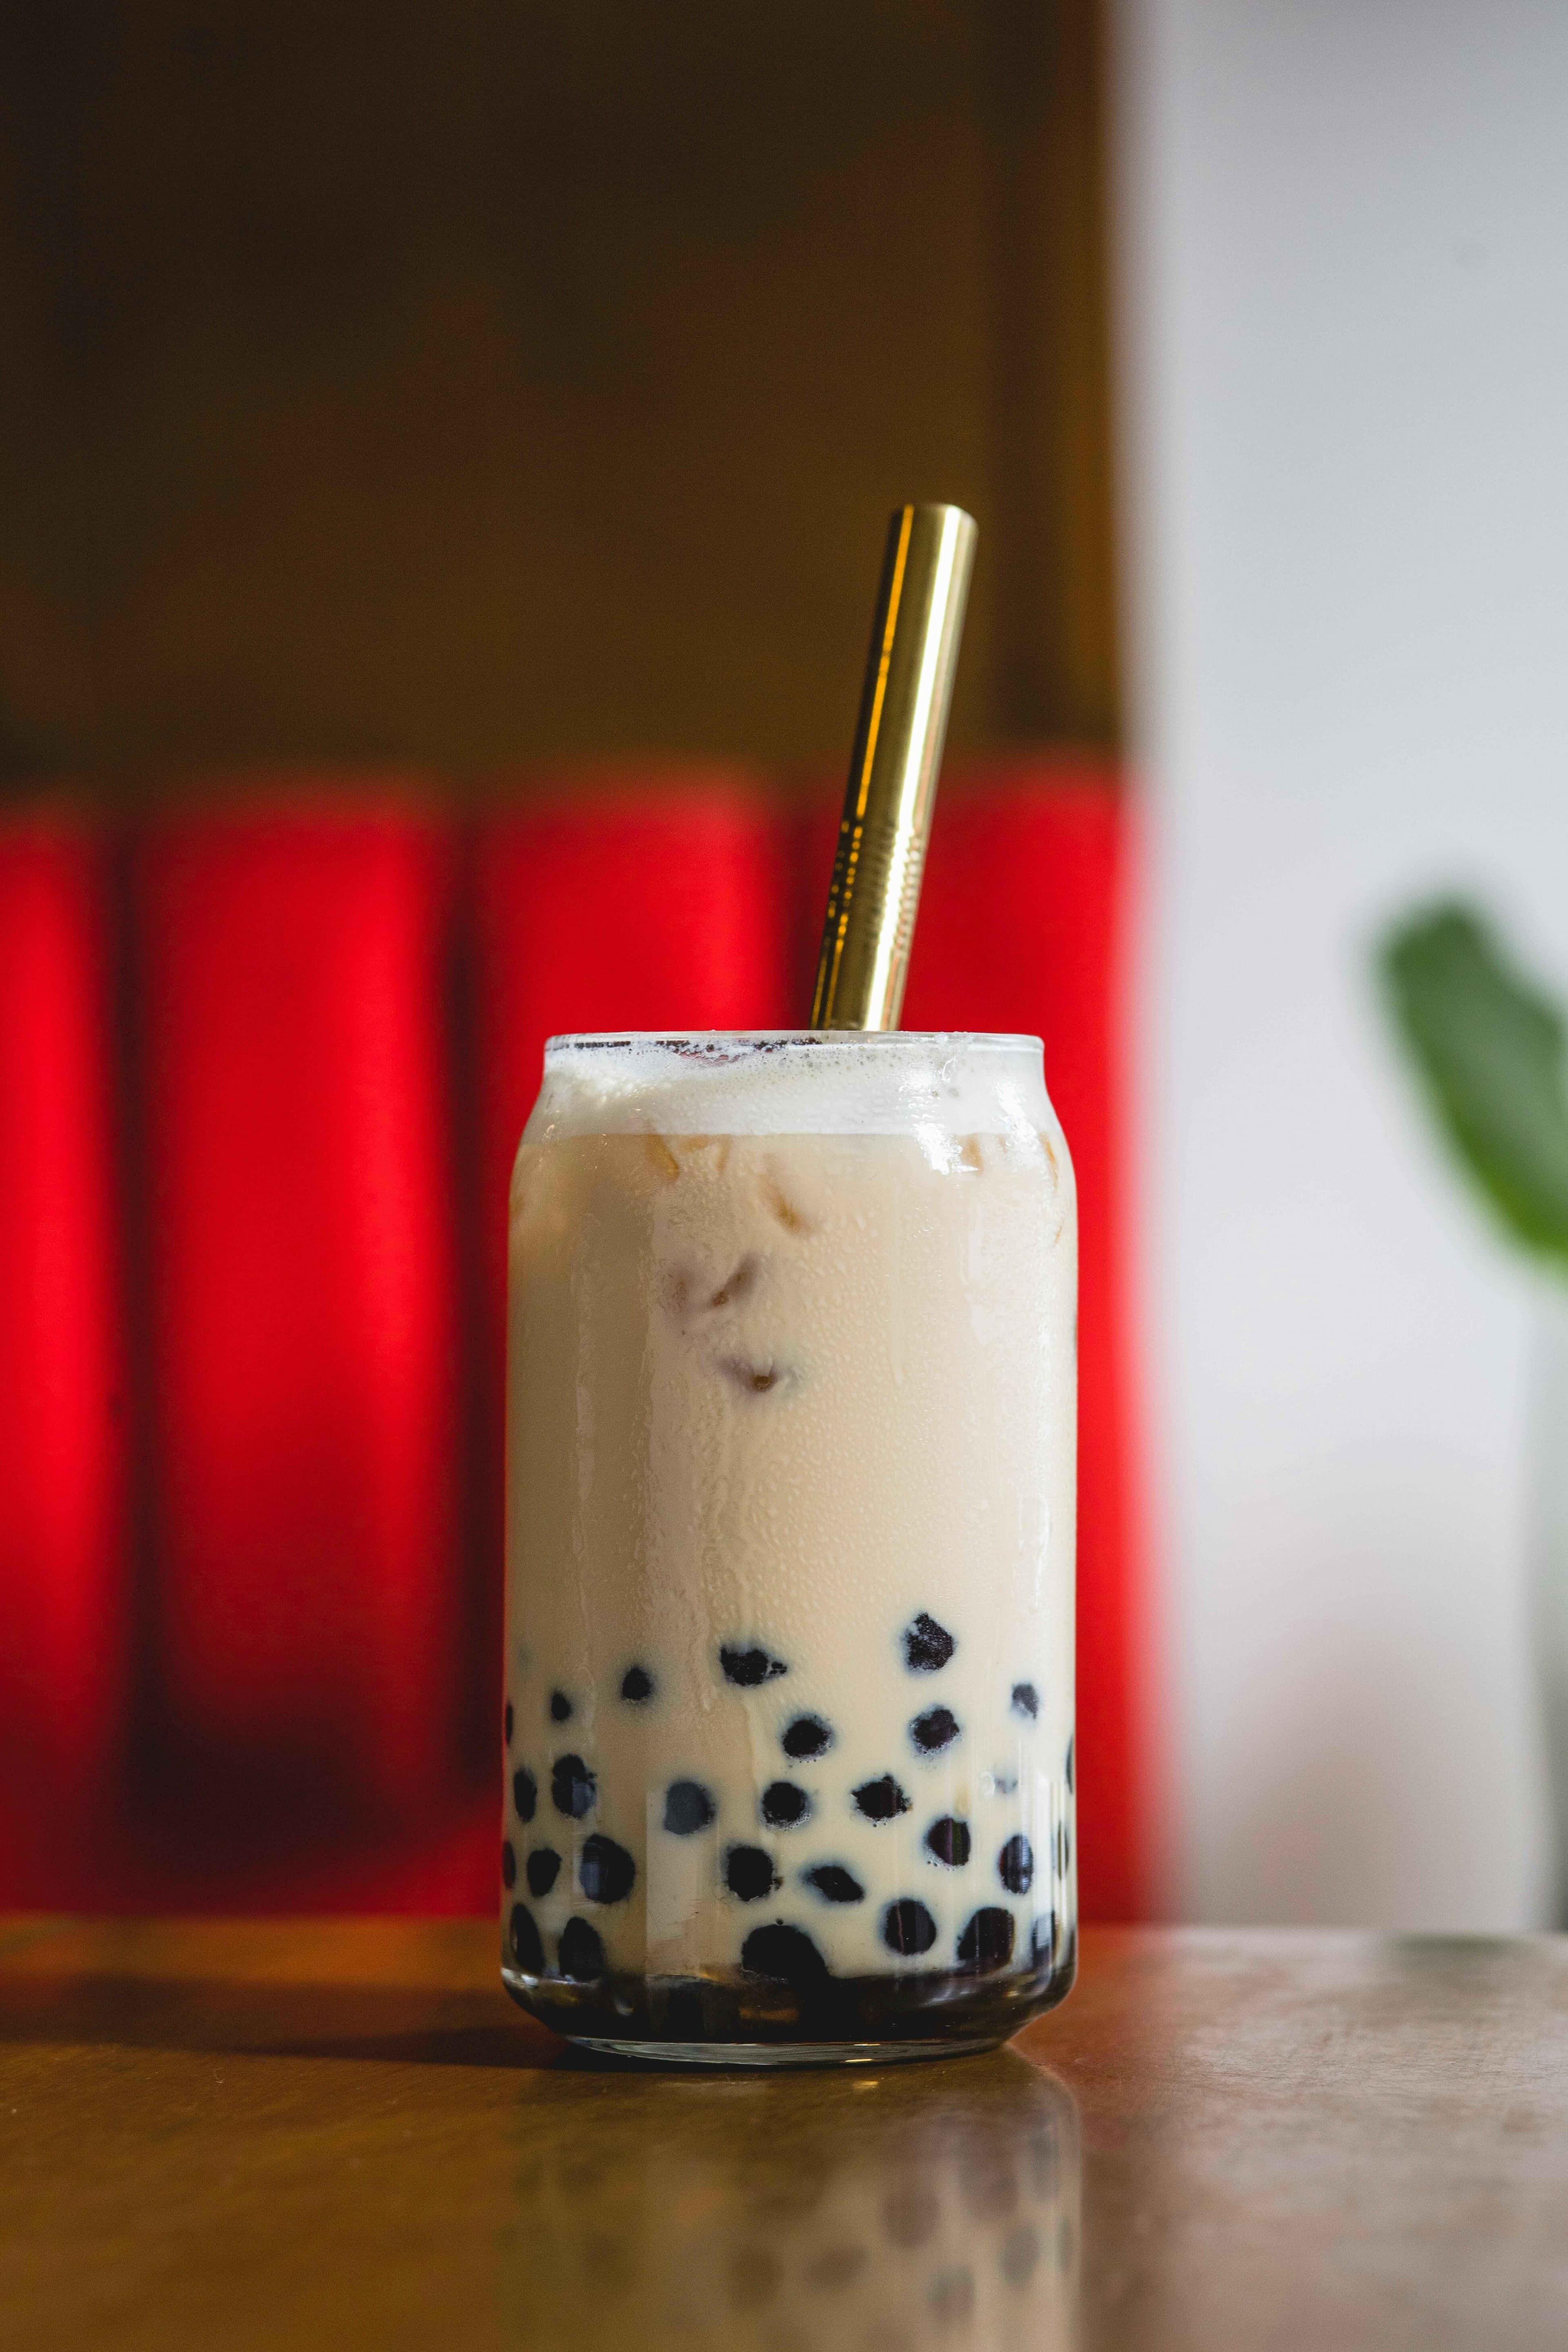 Bubble Tea For Adults: Adding A Splash Of Gin To The Refreshing Drink 